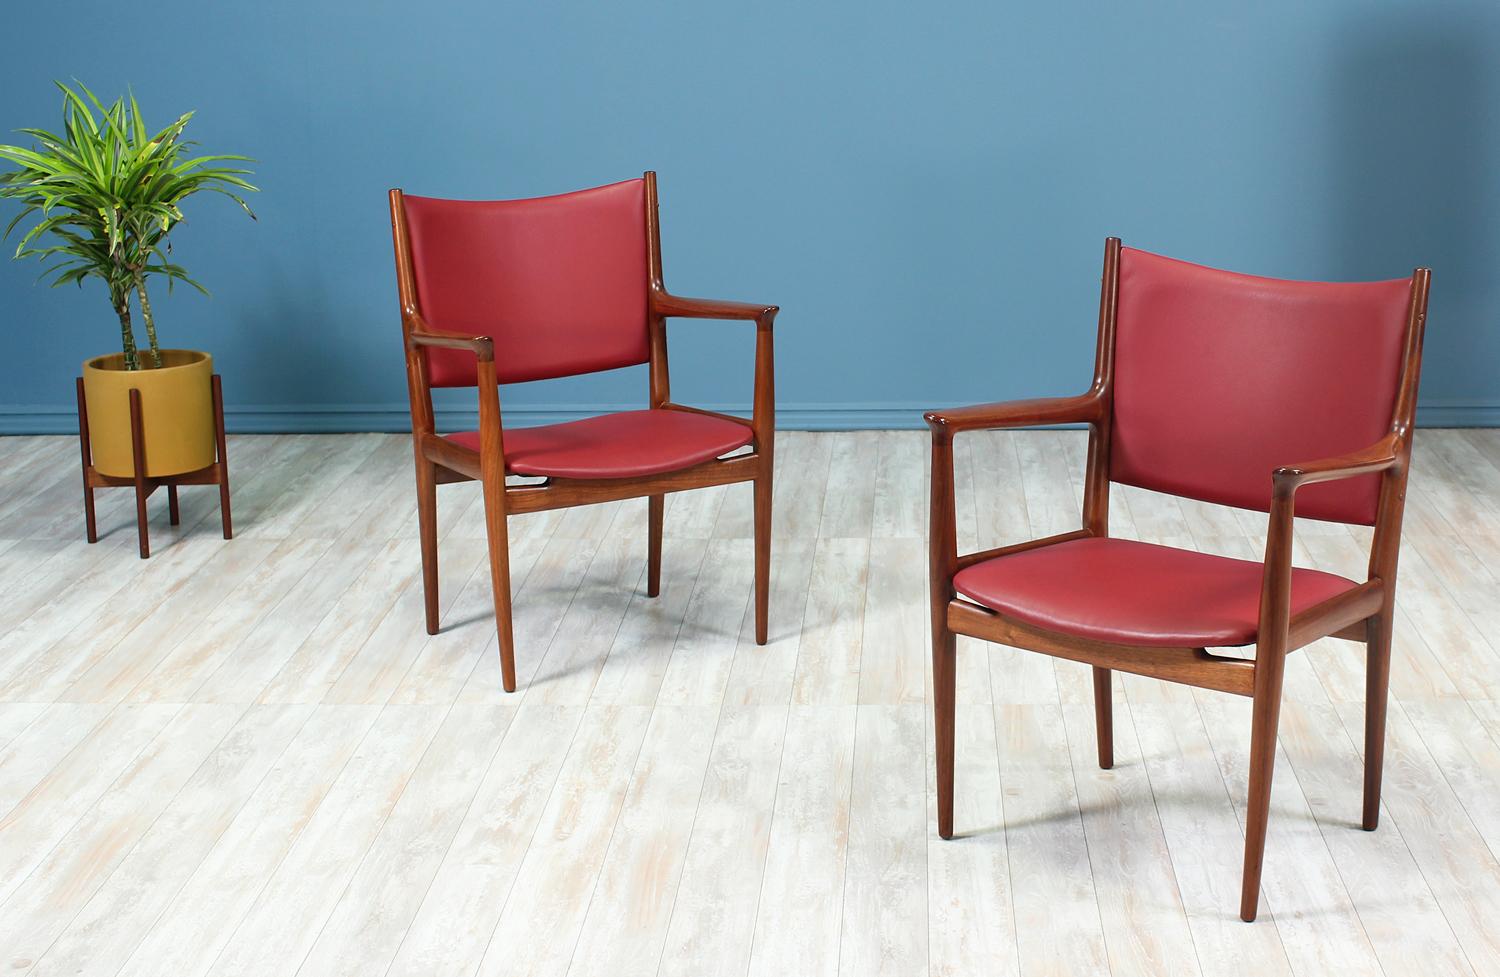 A Pair of JH-509 Armchairs designed by iconic Danish furniture designer, Hans J. Wegner, for Johannes Hansen in Denmark circa 1950's. Originally designed for conference and meeting rooms, this newly refinished pair is sculpted with a solid walnut